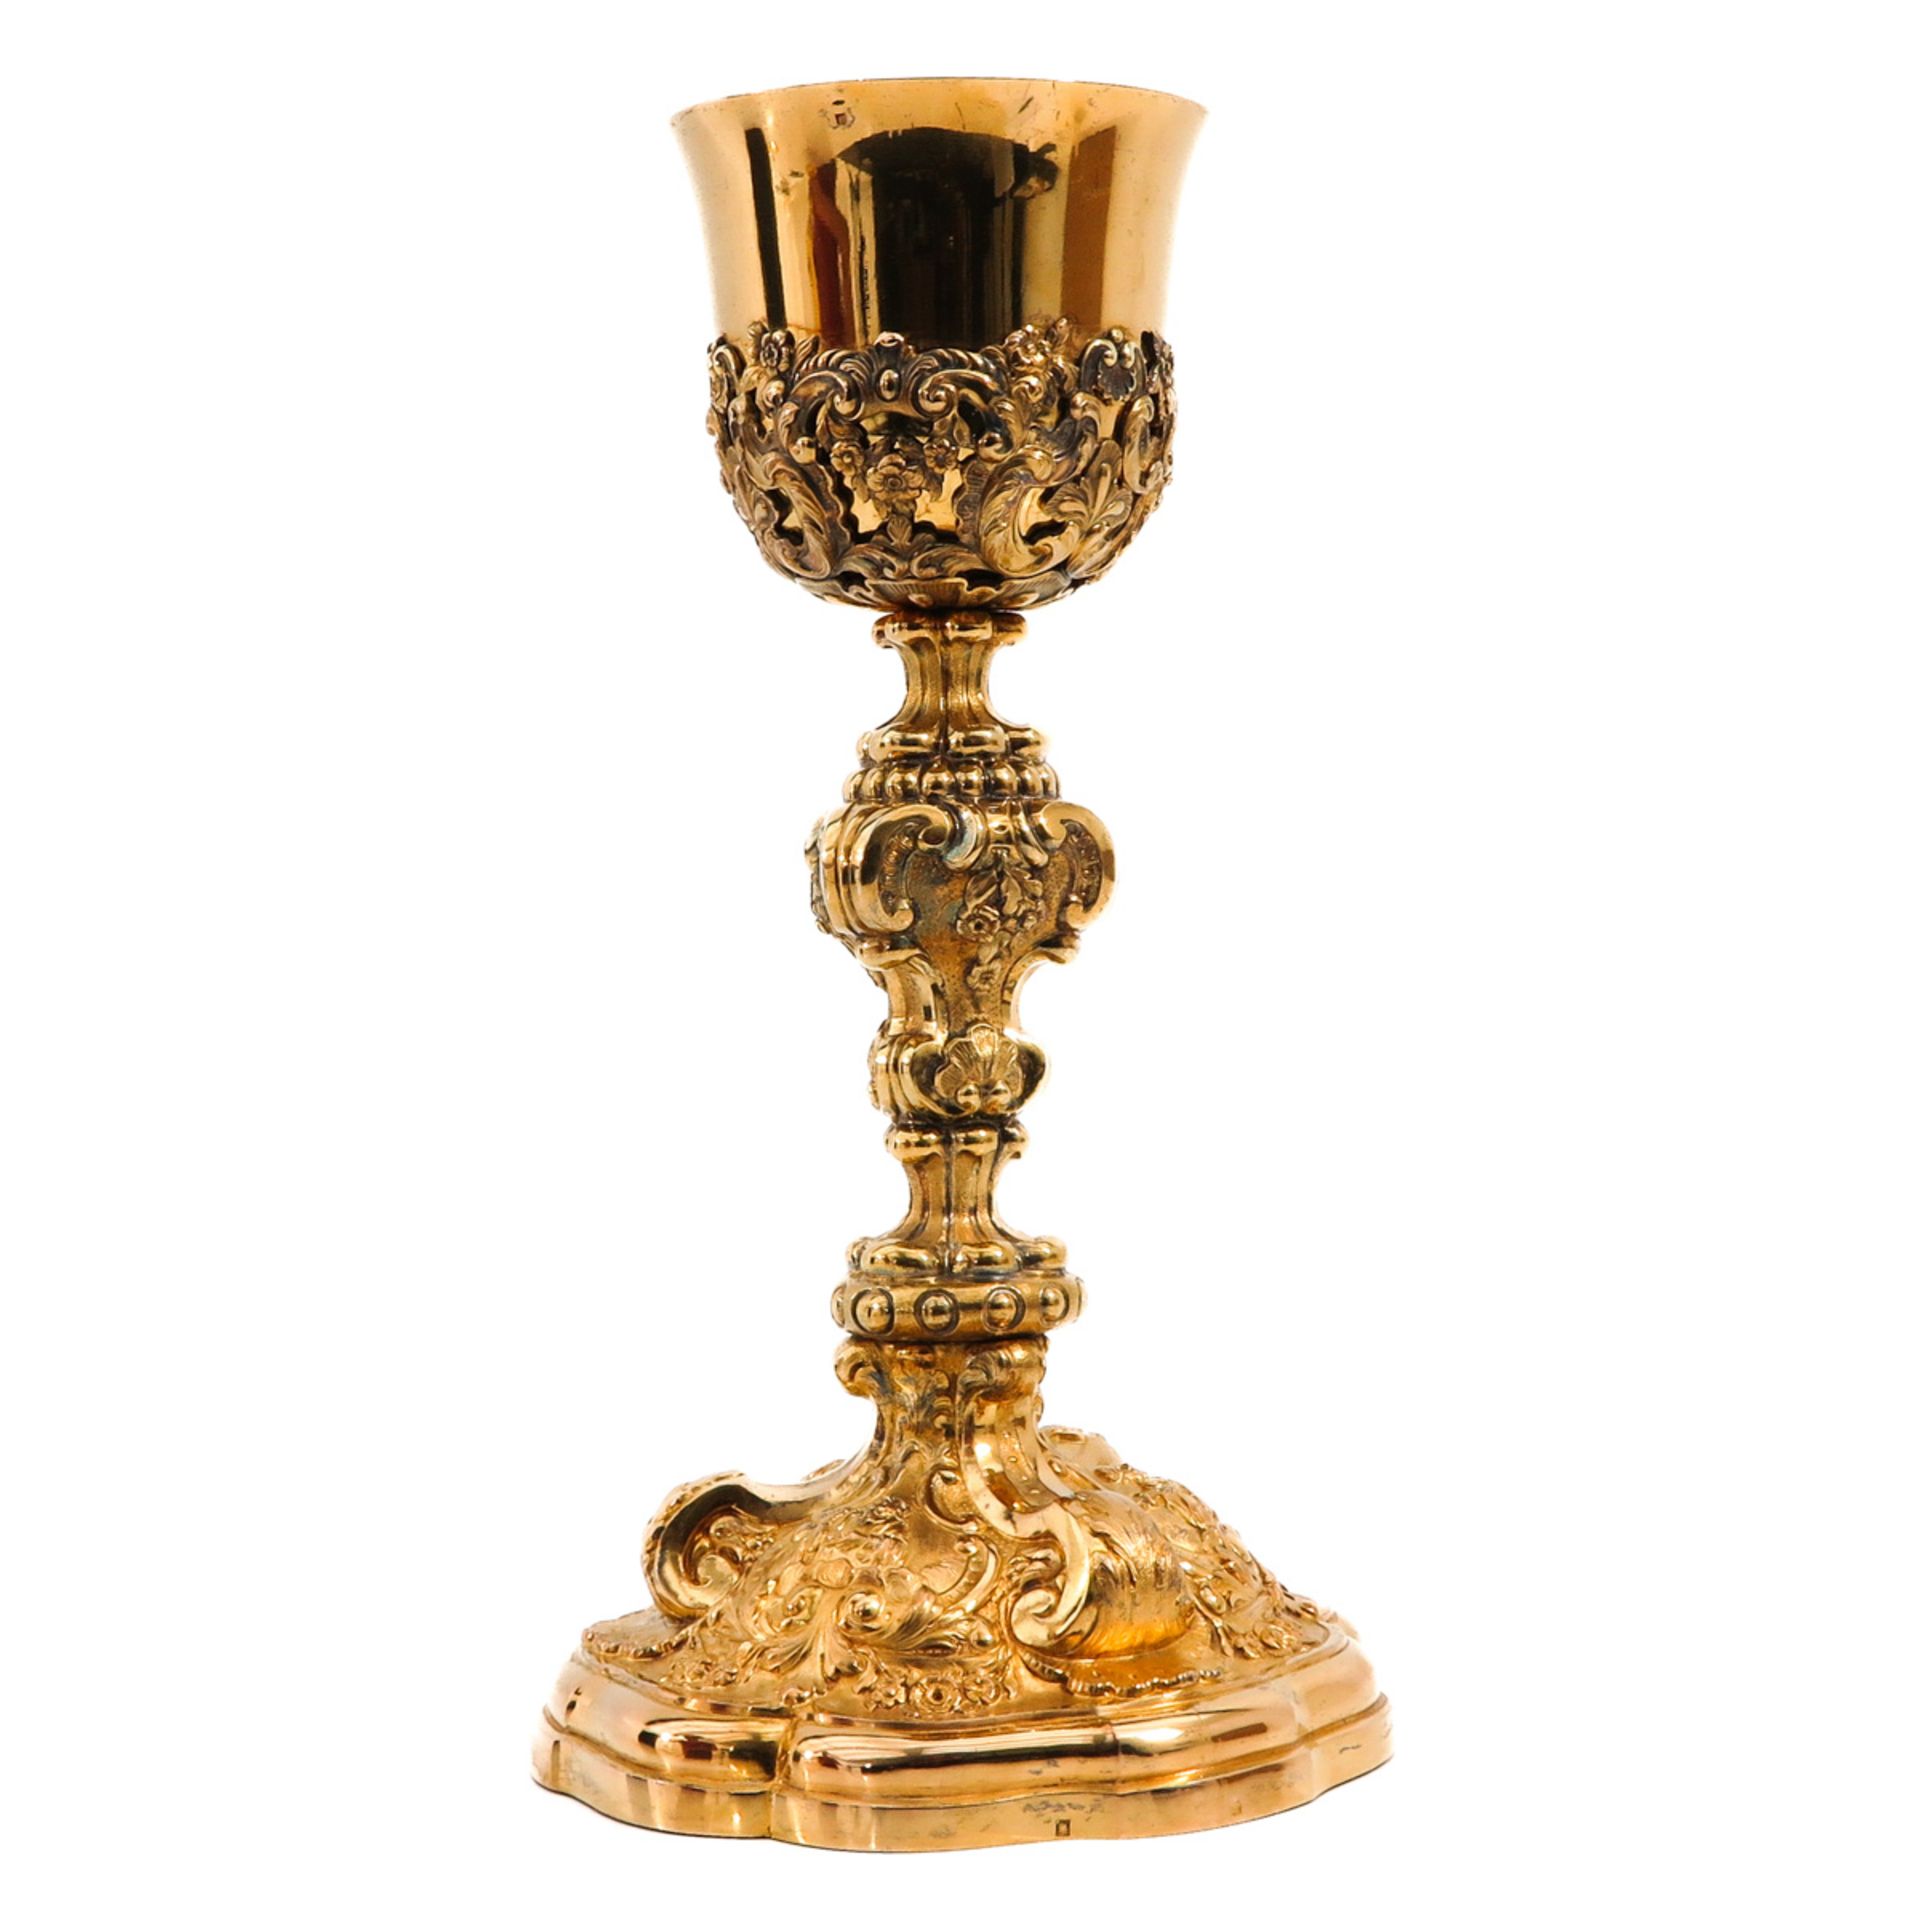 A Very Large 19th Century Gold Plated Silver Chalice - Image 3 of 10